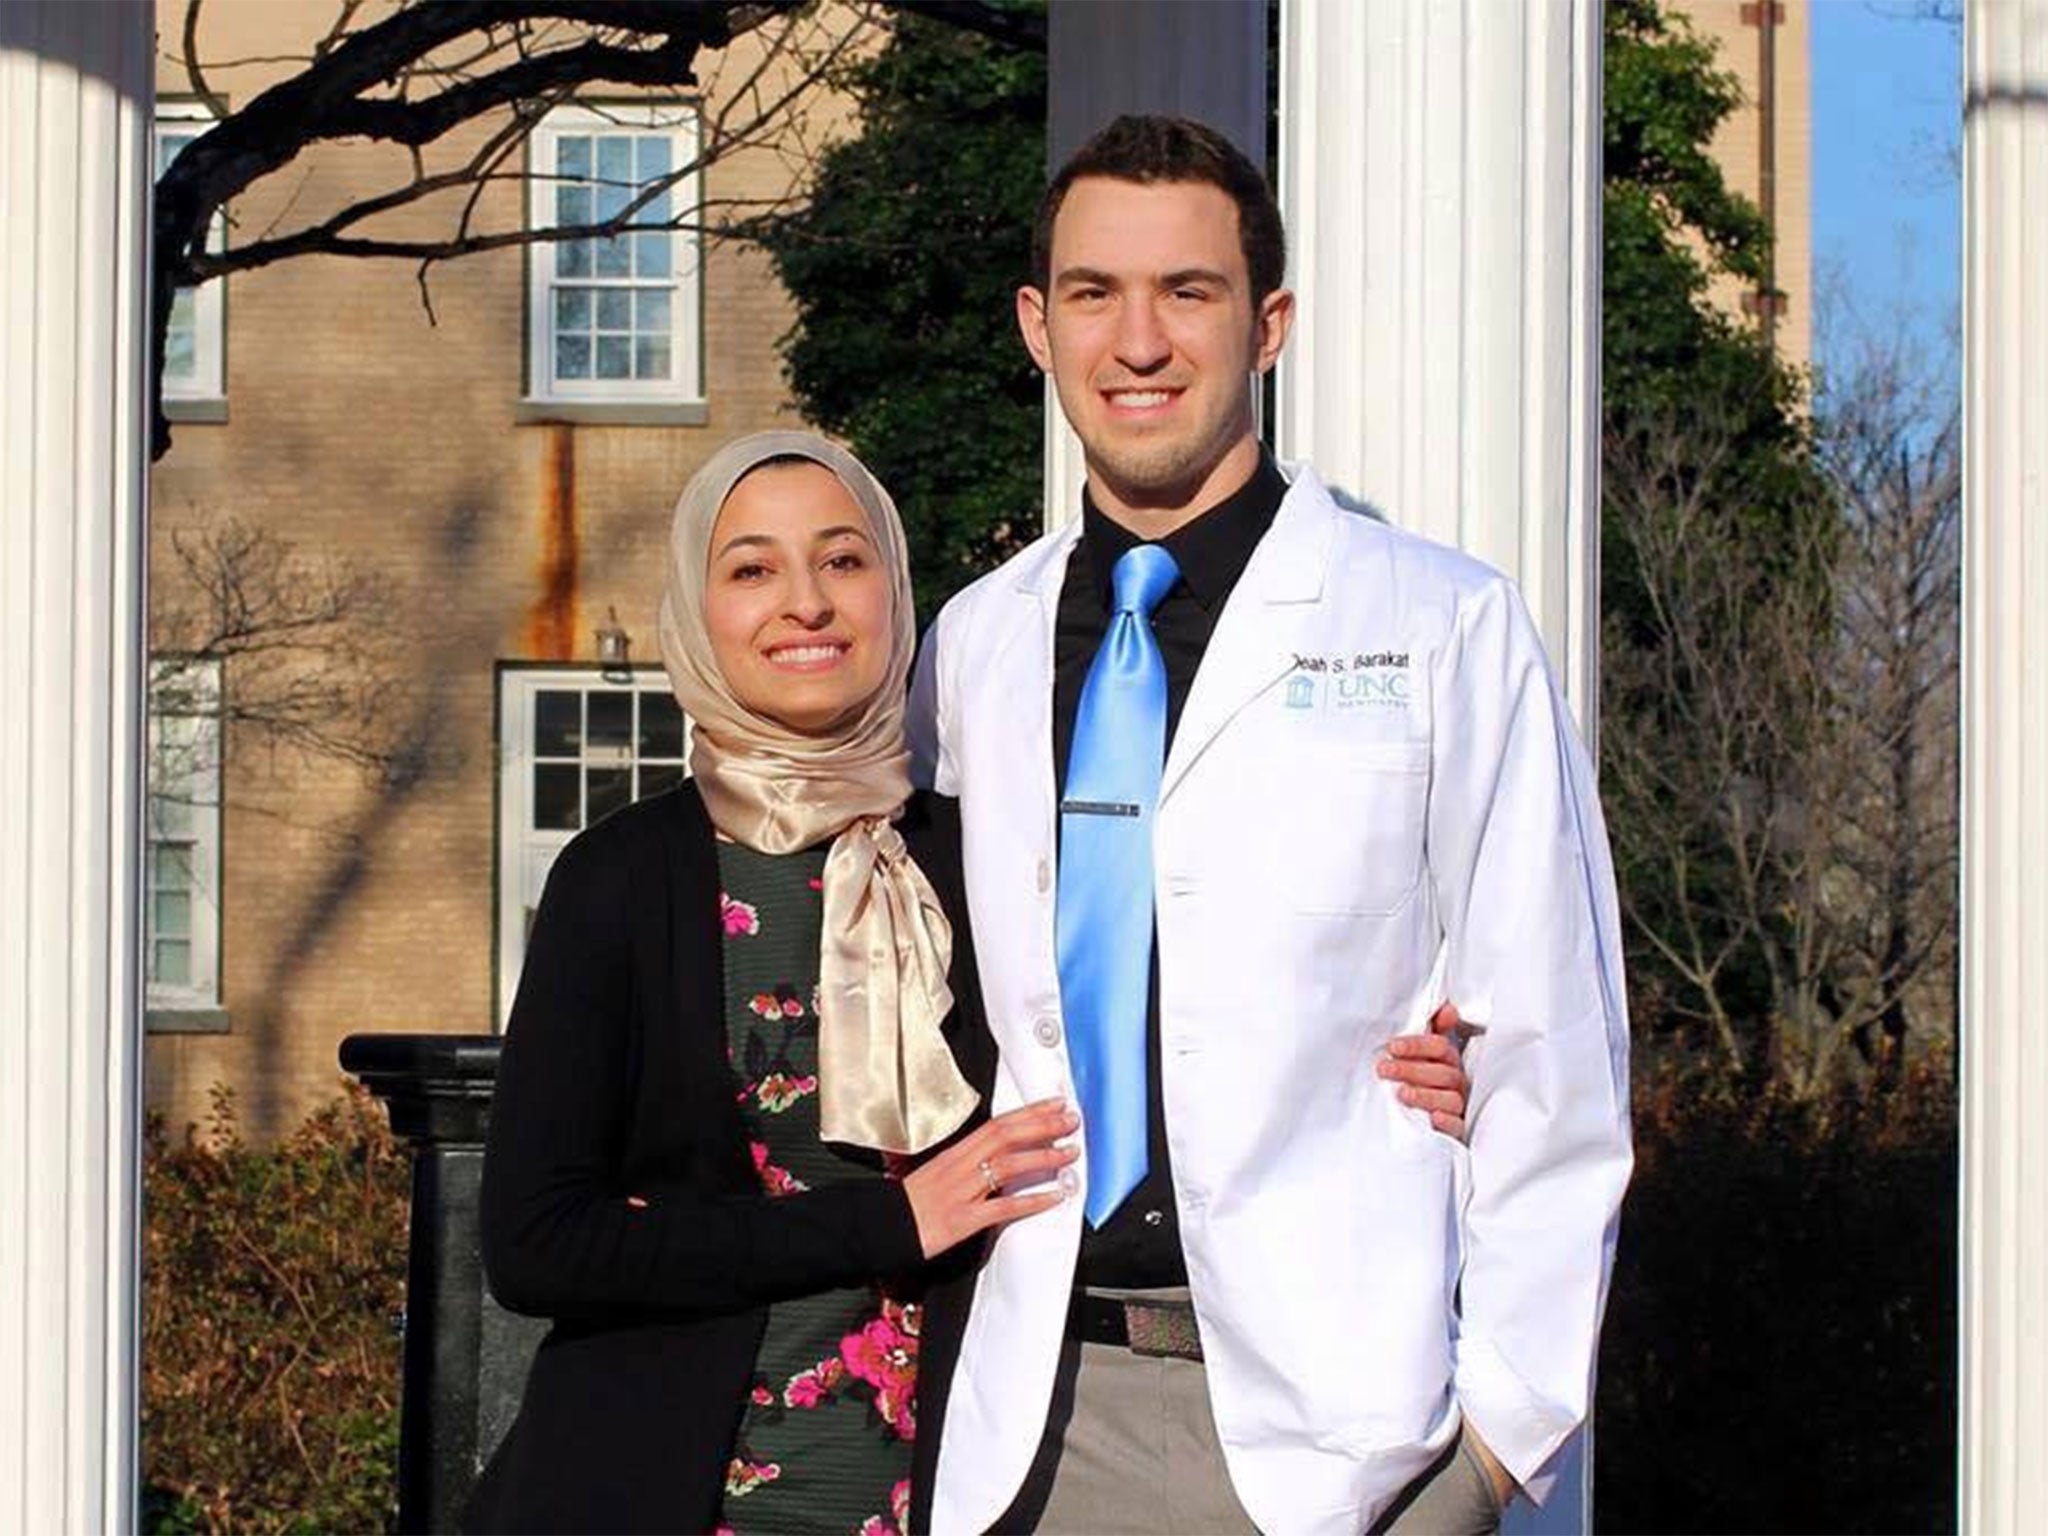 Deah Barakat was a dental student at UNC who worked for a charity giving dental care to Palestinian children and refugees